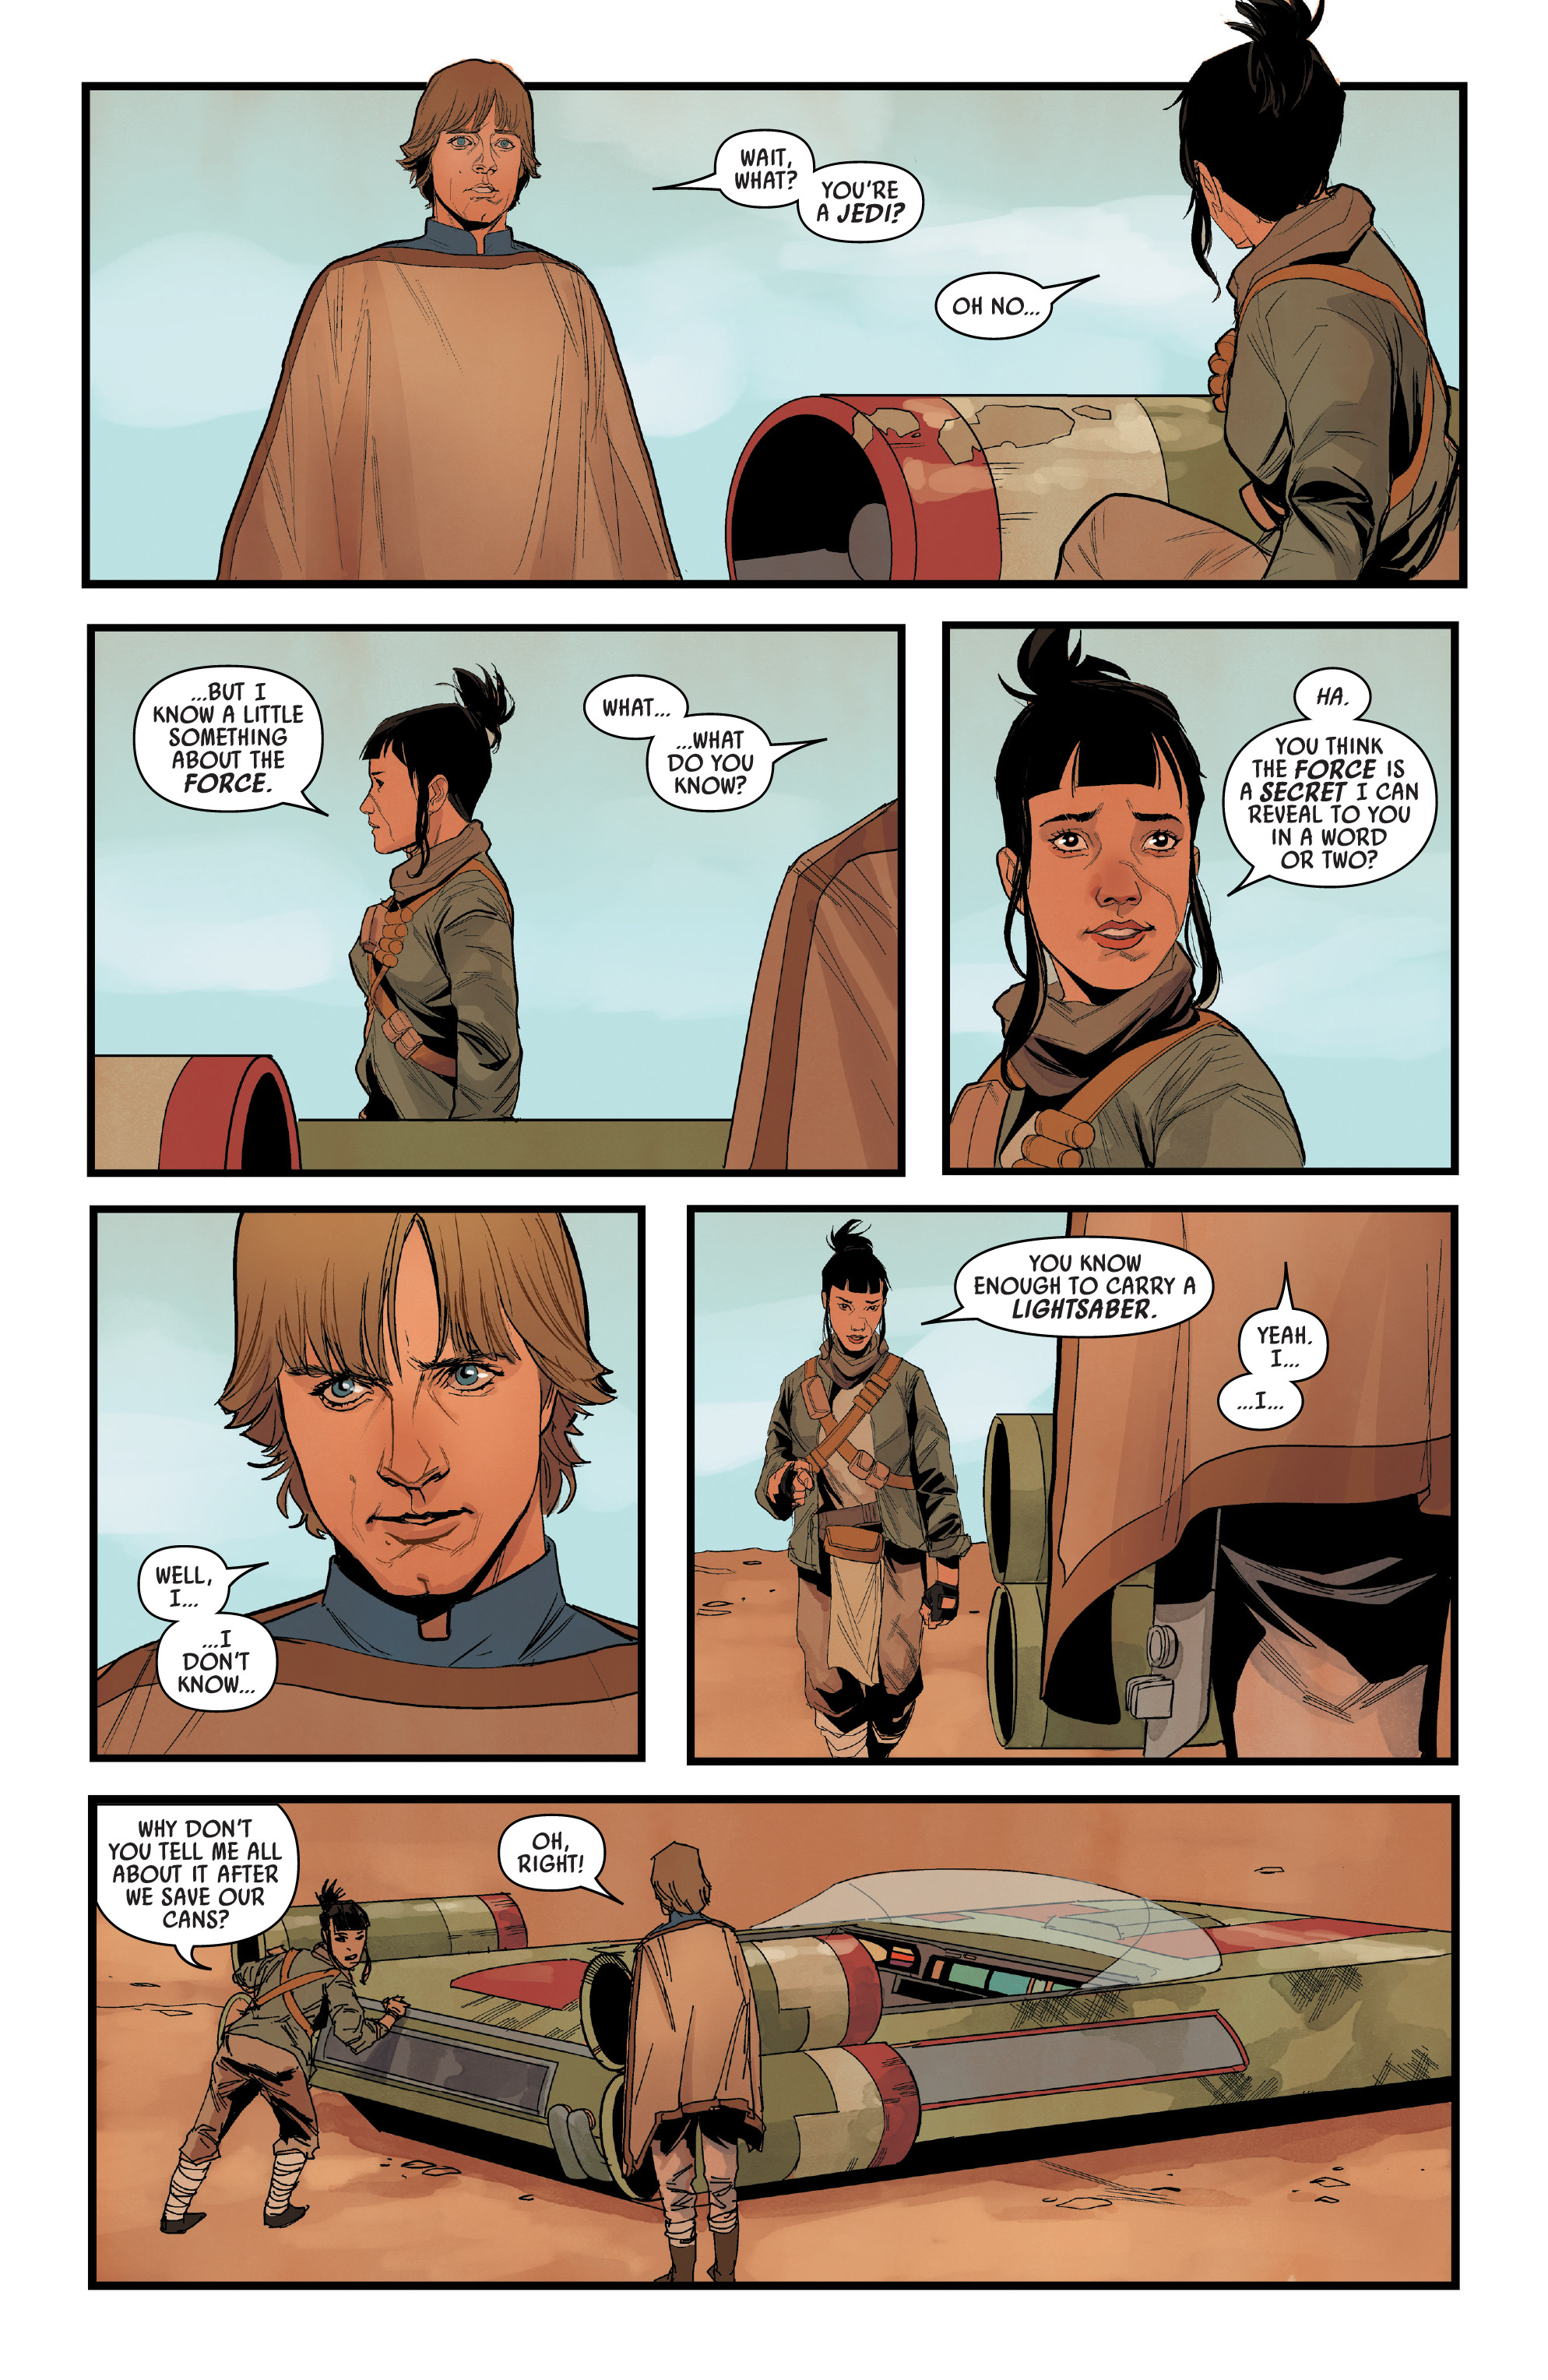 Star Wars (2015-): Chapter 70 - Page 4